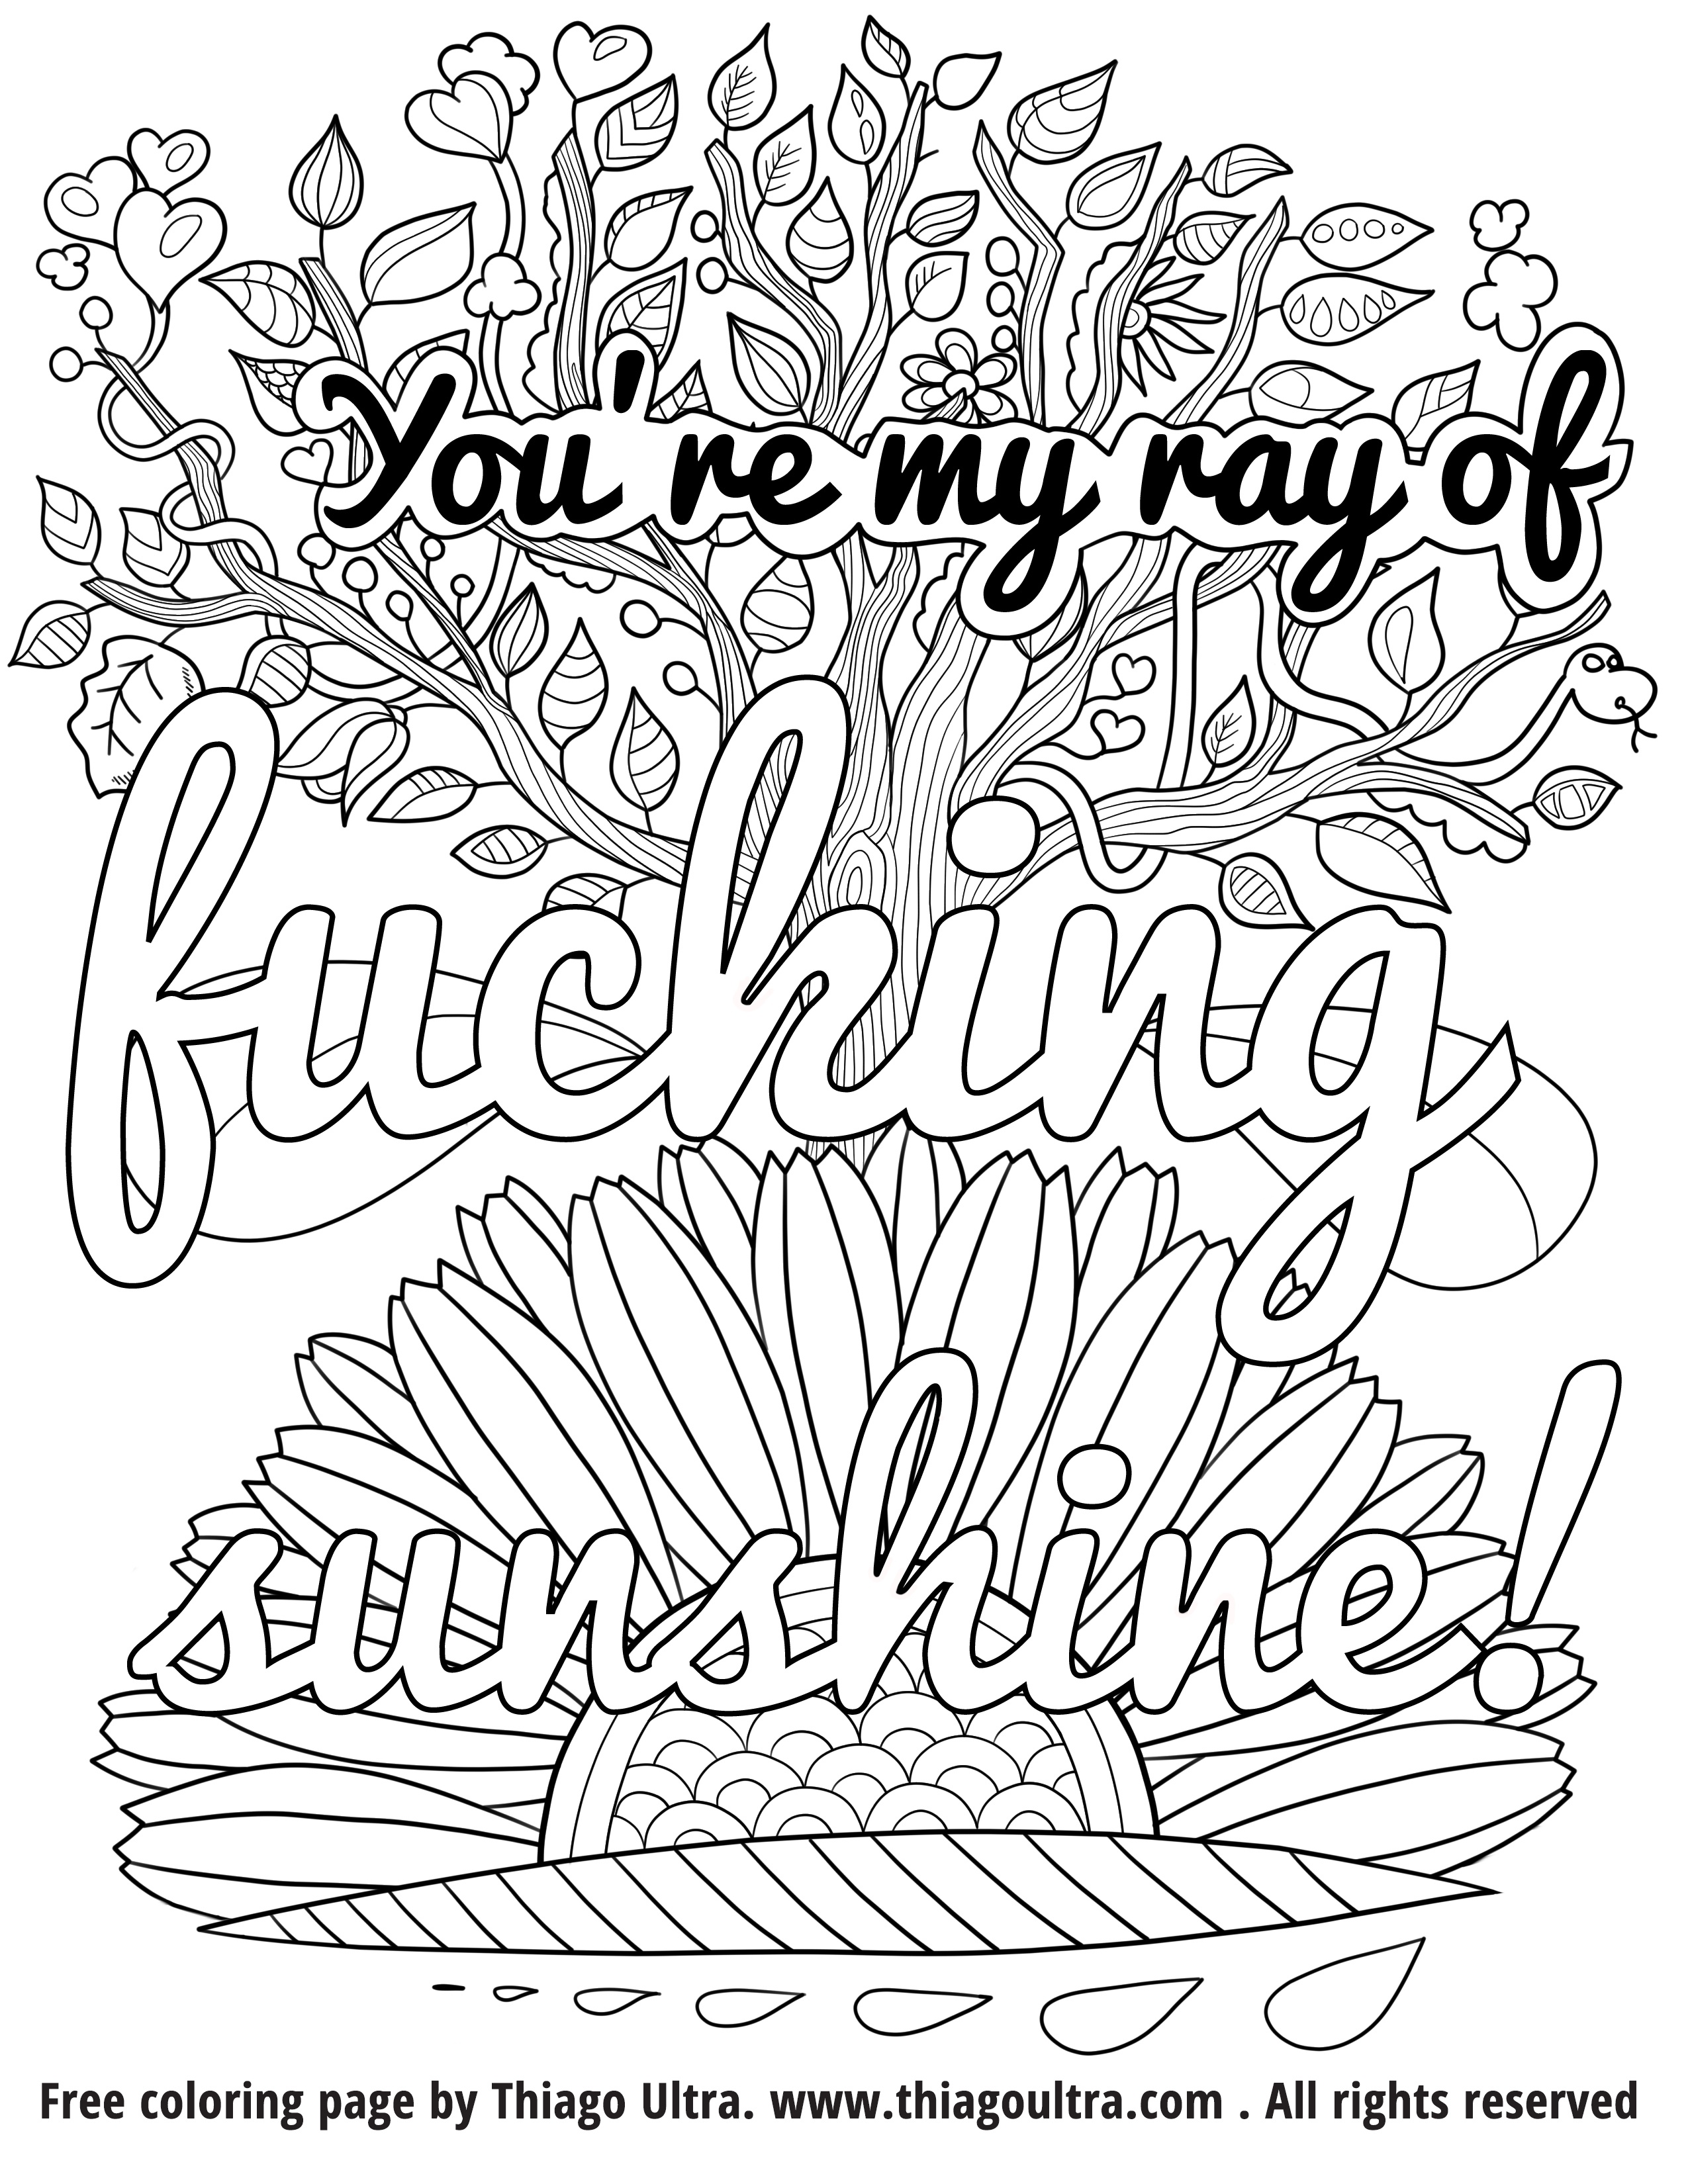 Coloring Ideas : 1840D37706A73E0C394A077851E5964E_Focus Free - Free Printable Coloring Pages For Adults Swear Words